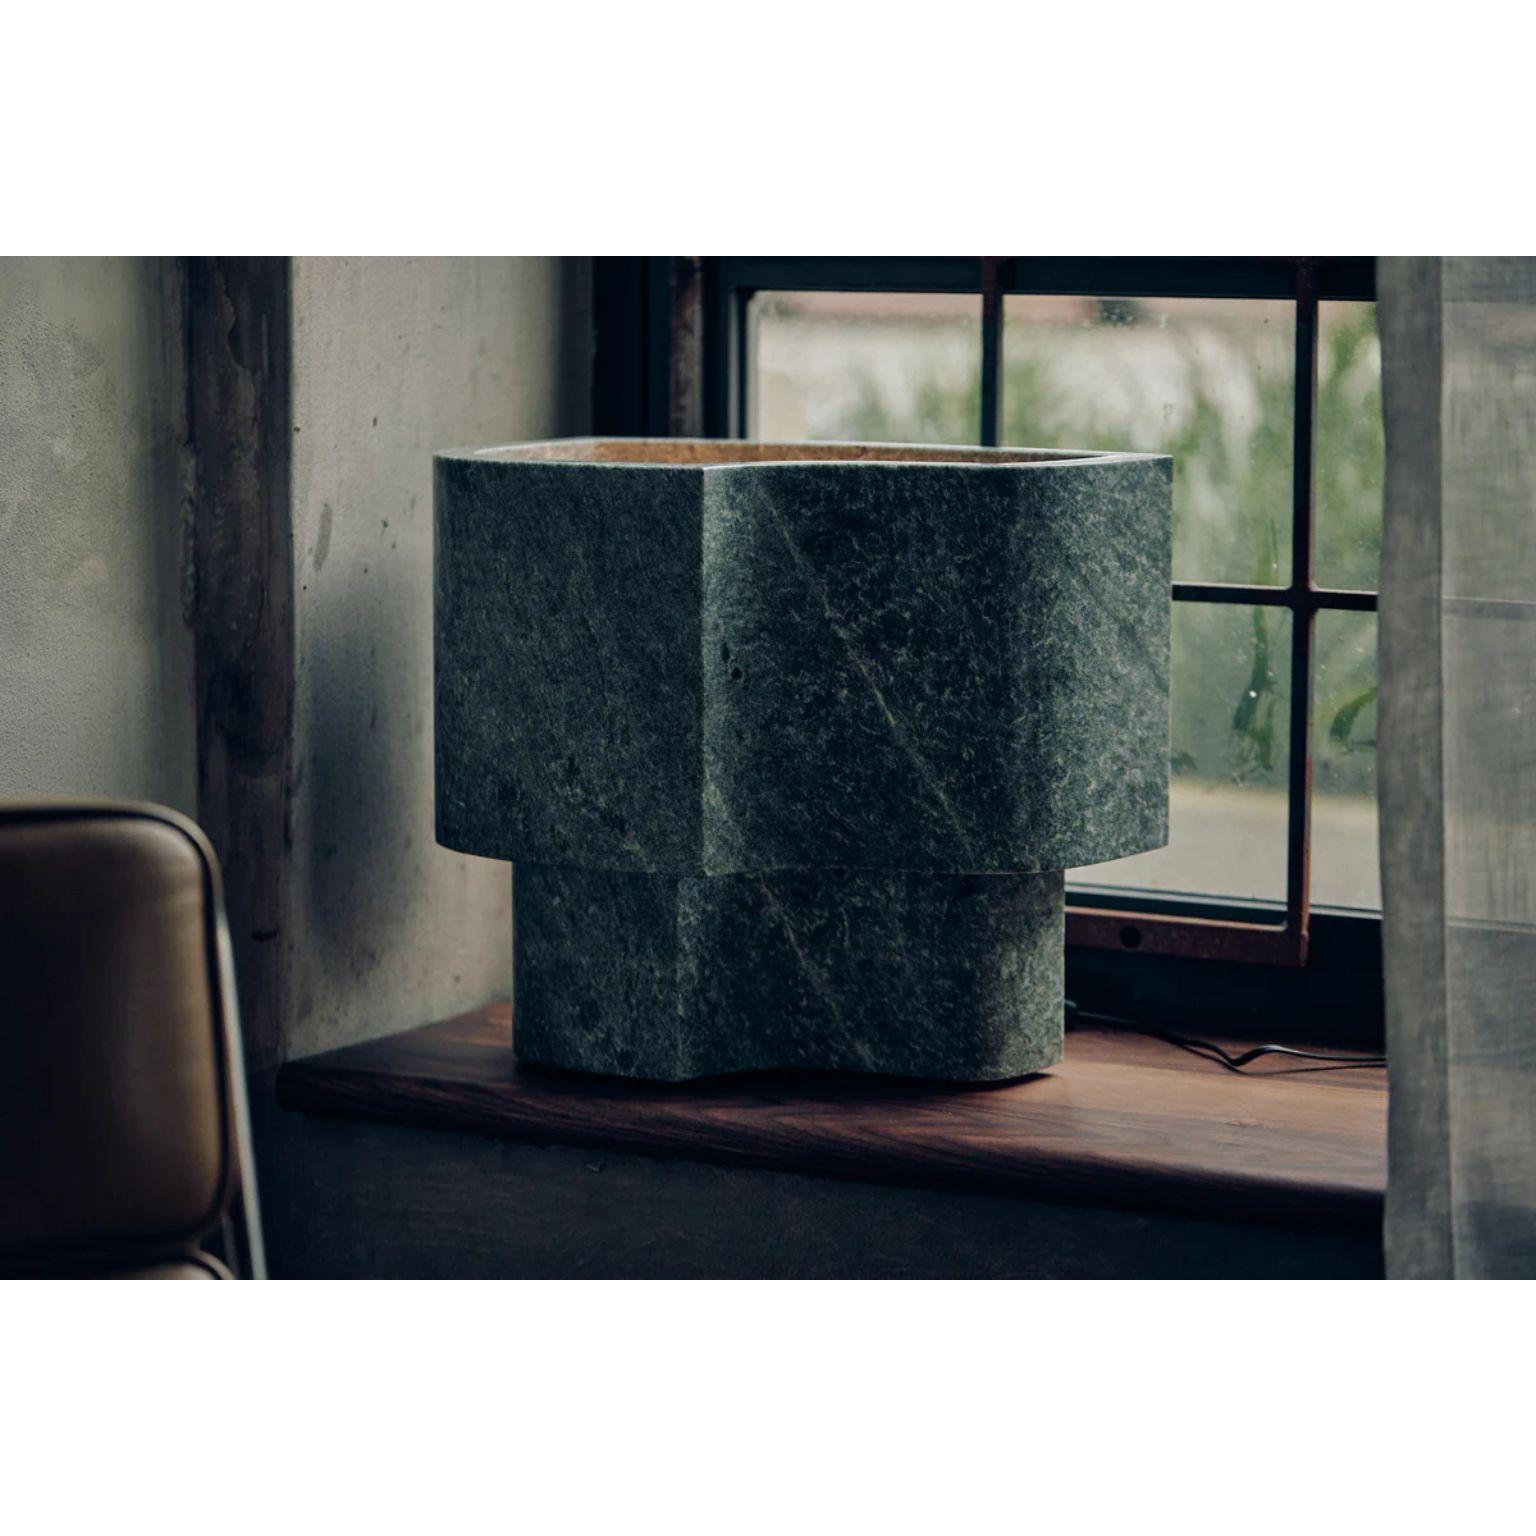 Verde Offset Lamp by Henry Wilson
Dimensions: W 44.5 x D 30 x H 39 cm
Materials: Verde Marble

Offset Lamp is hewn from two pieces of solid Verde Marble. As stone is a natural material, variations of the pattern will occur from piece to piece.
Emits